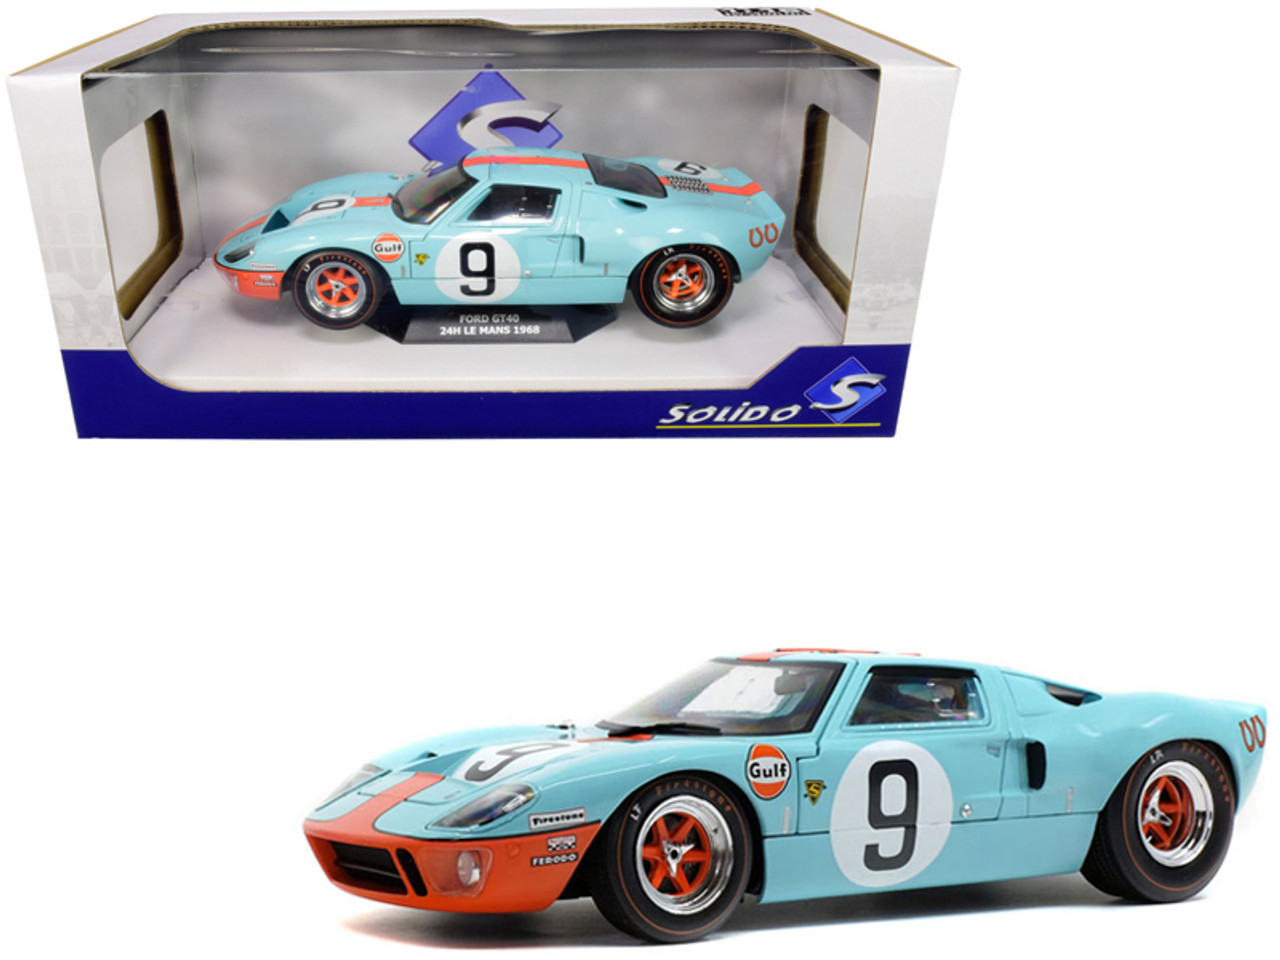 Ford GT40 MKI #9 "Gulf Oil" 24H of Le Mans (1968) 1/18 Diecast Model Car by Solido